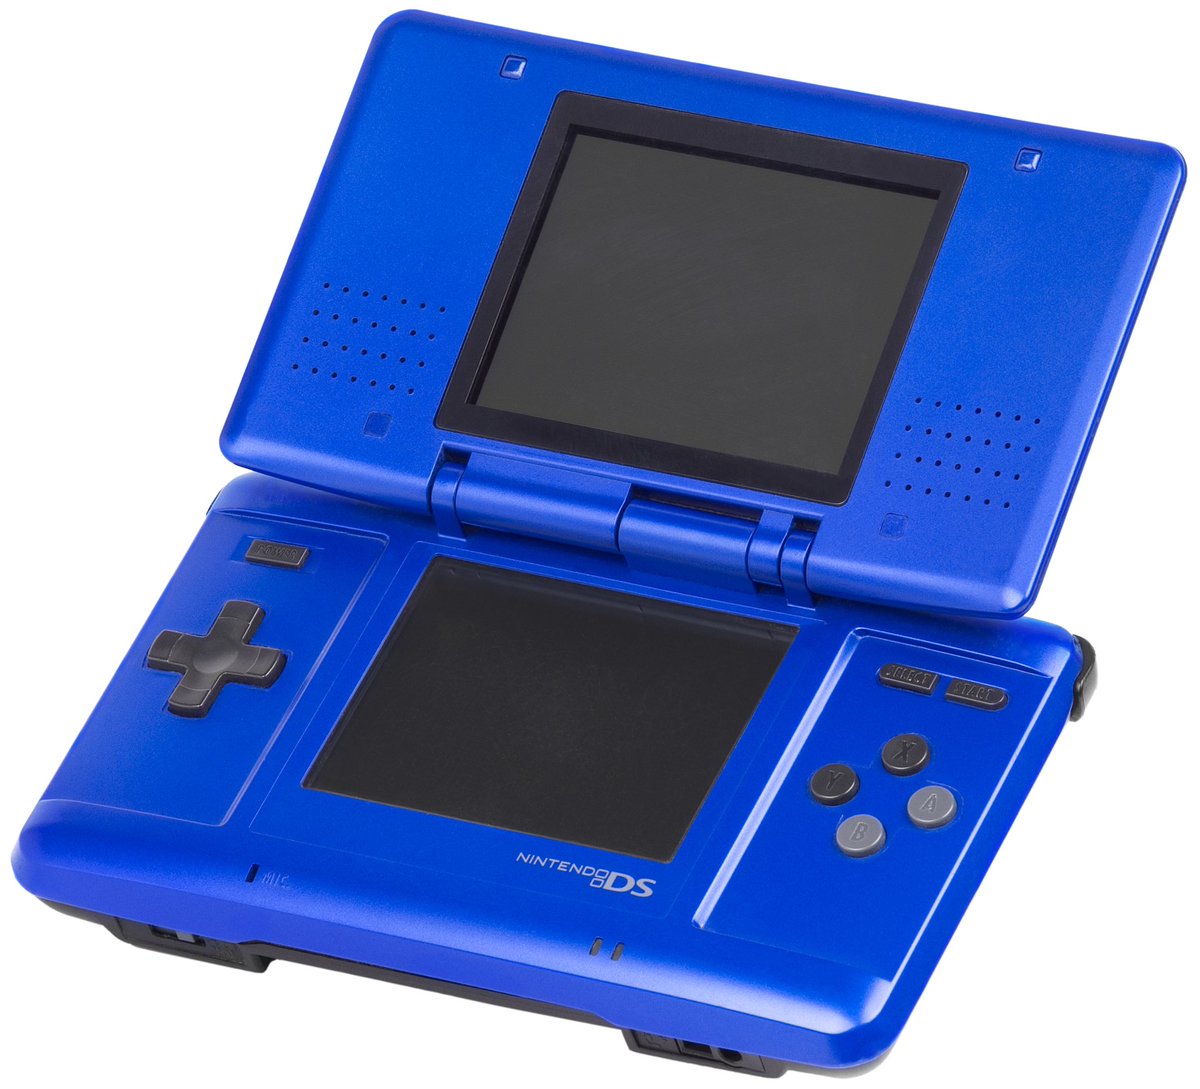 Blue! I have a blue house with a blue window. Blue is the color of all that I wear. Blue are the streets and all the trees are too. I have a girlfriend and she is so blue.  #Gamersunite  #retrogaming  #gaming